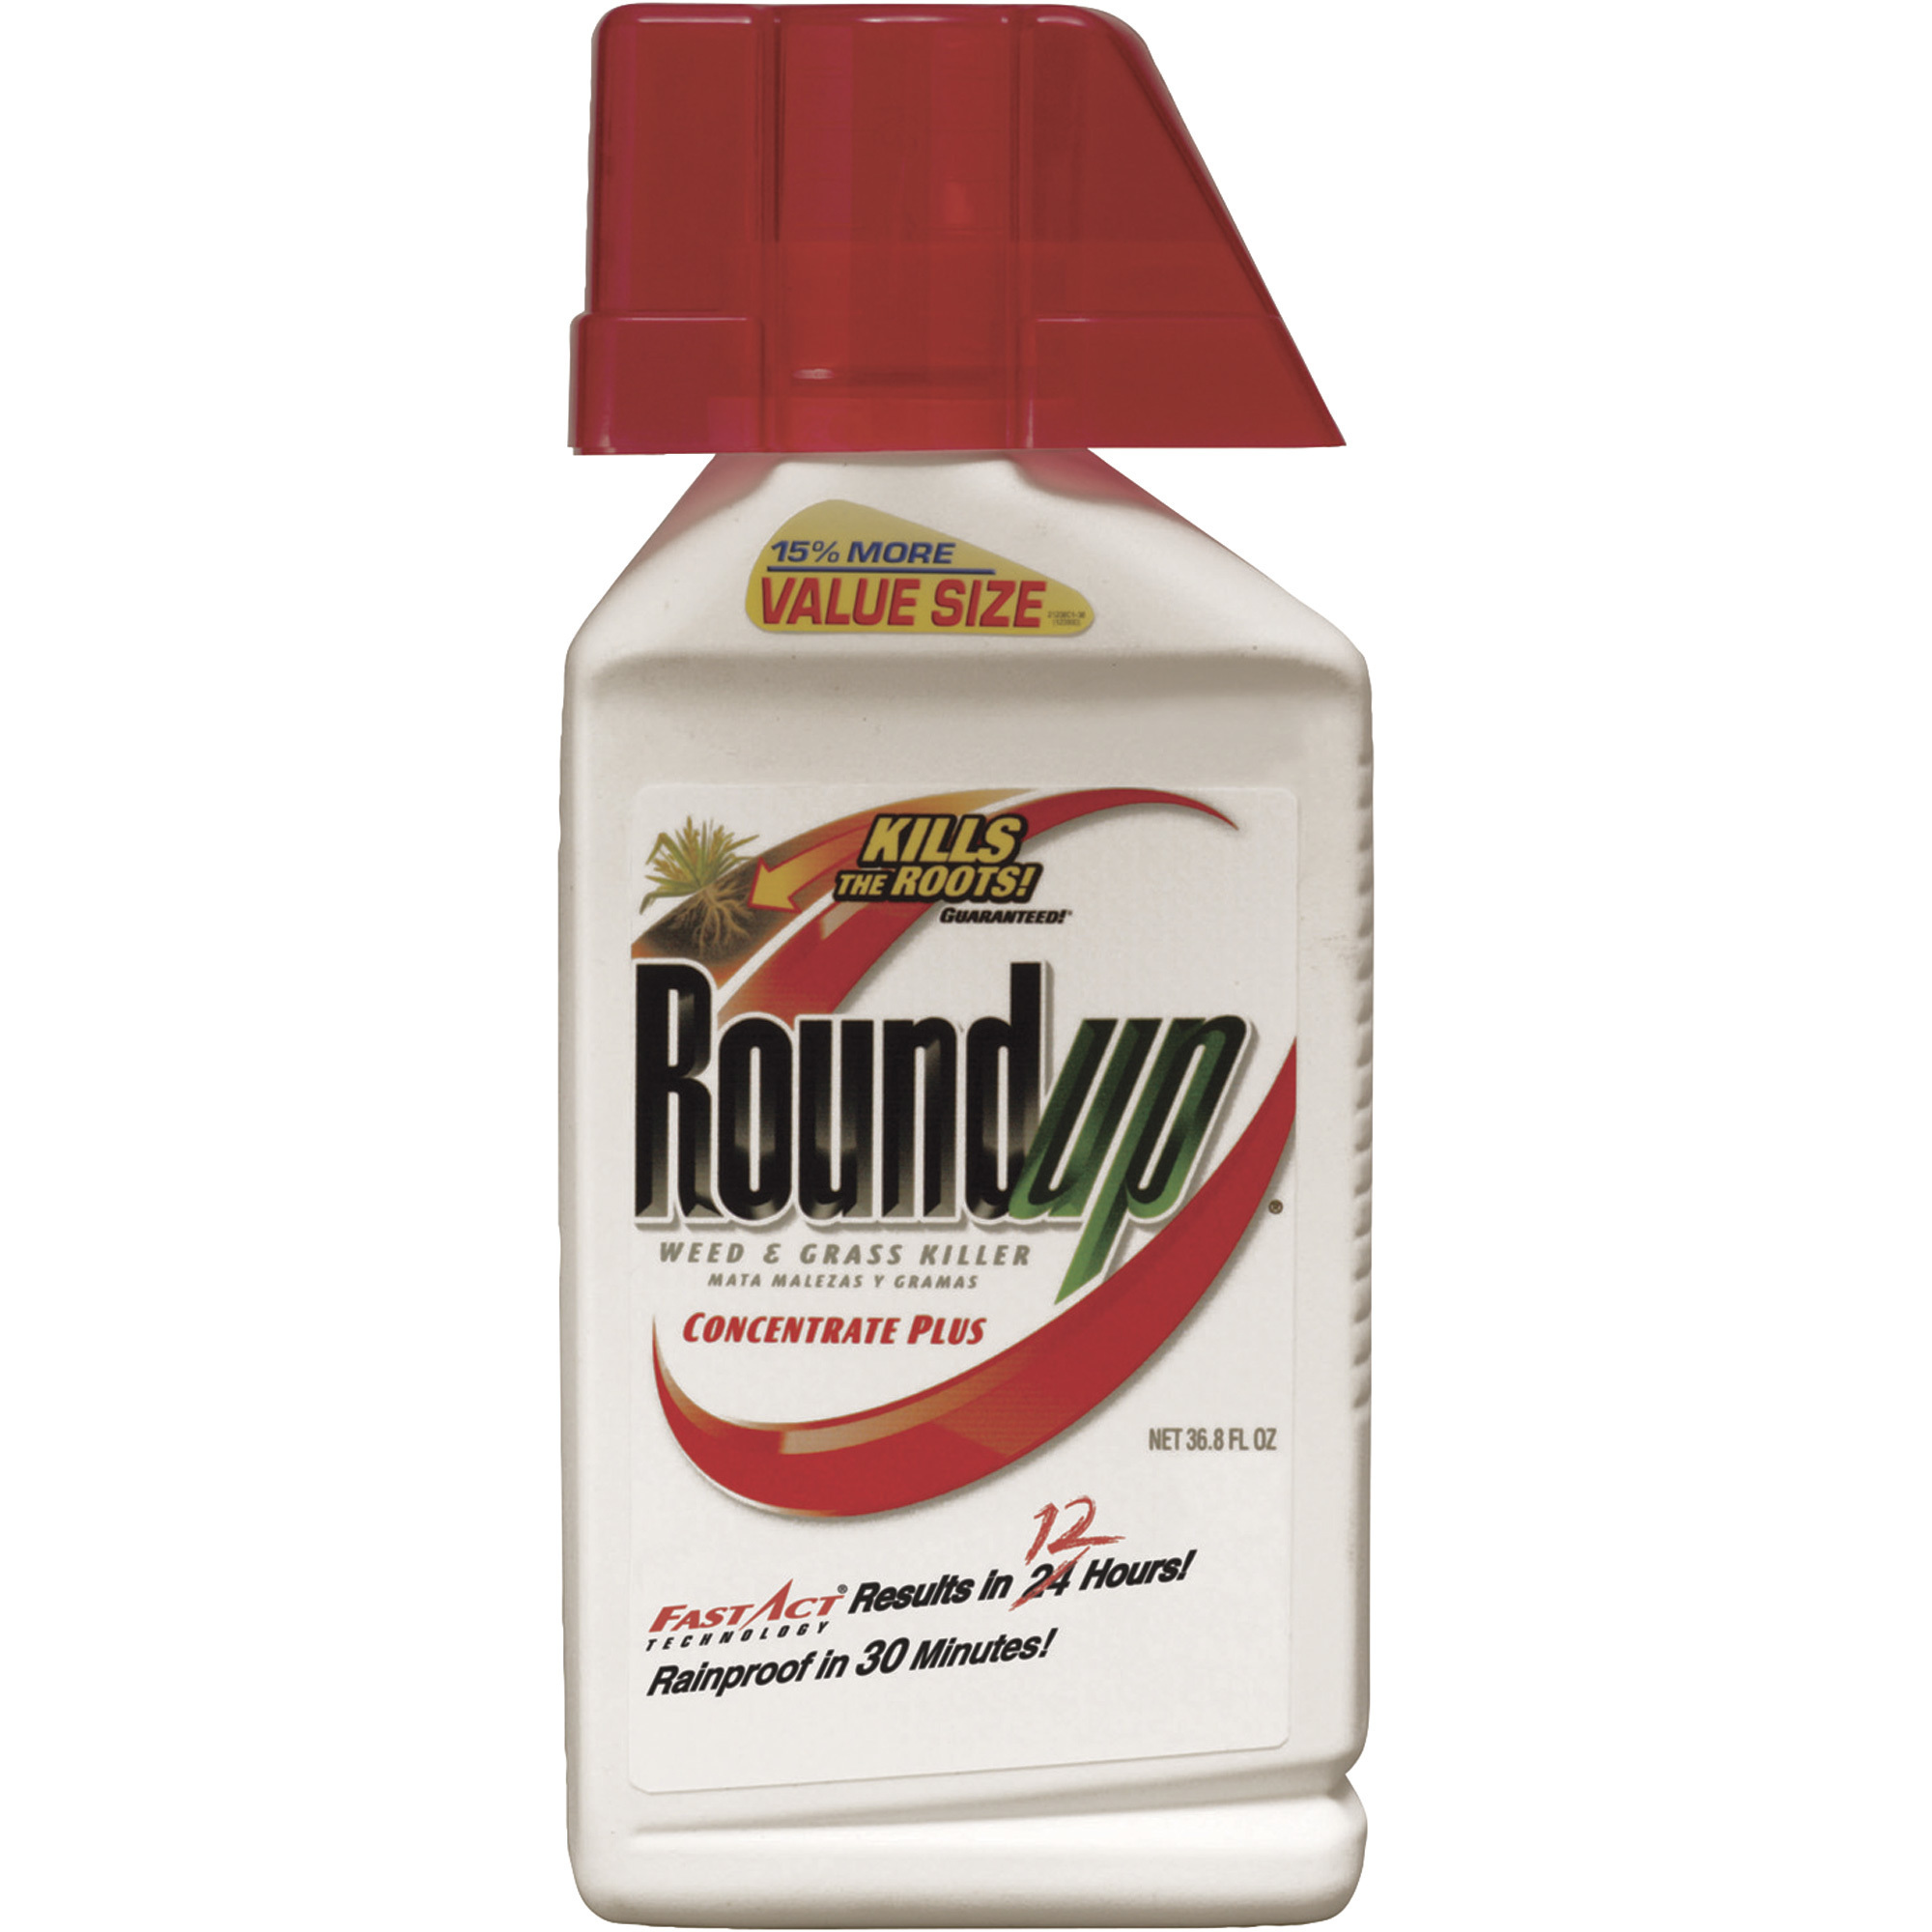 Roundup Concentrate Plus Weed & Grass Killer â FastAct Technology, 36.8oz. Jug, Model 5376312